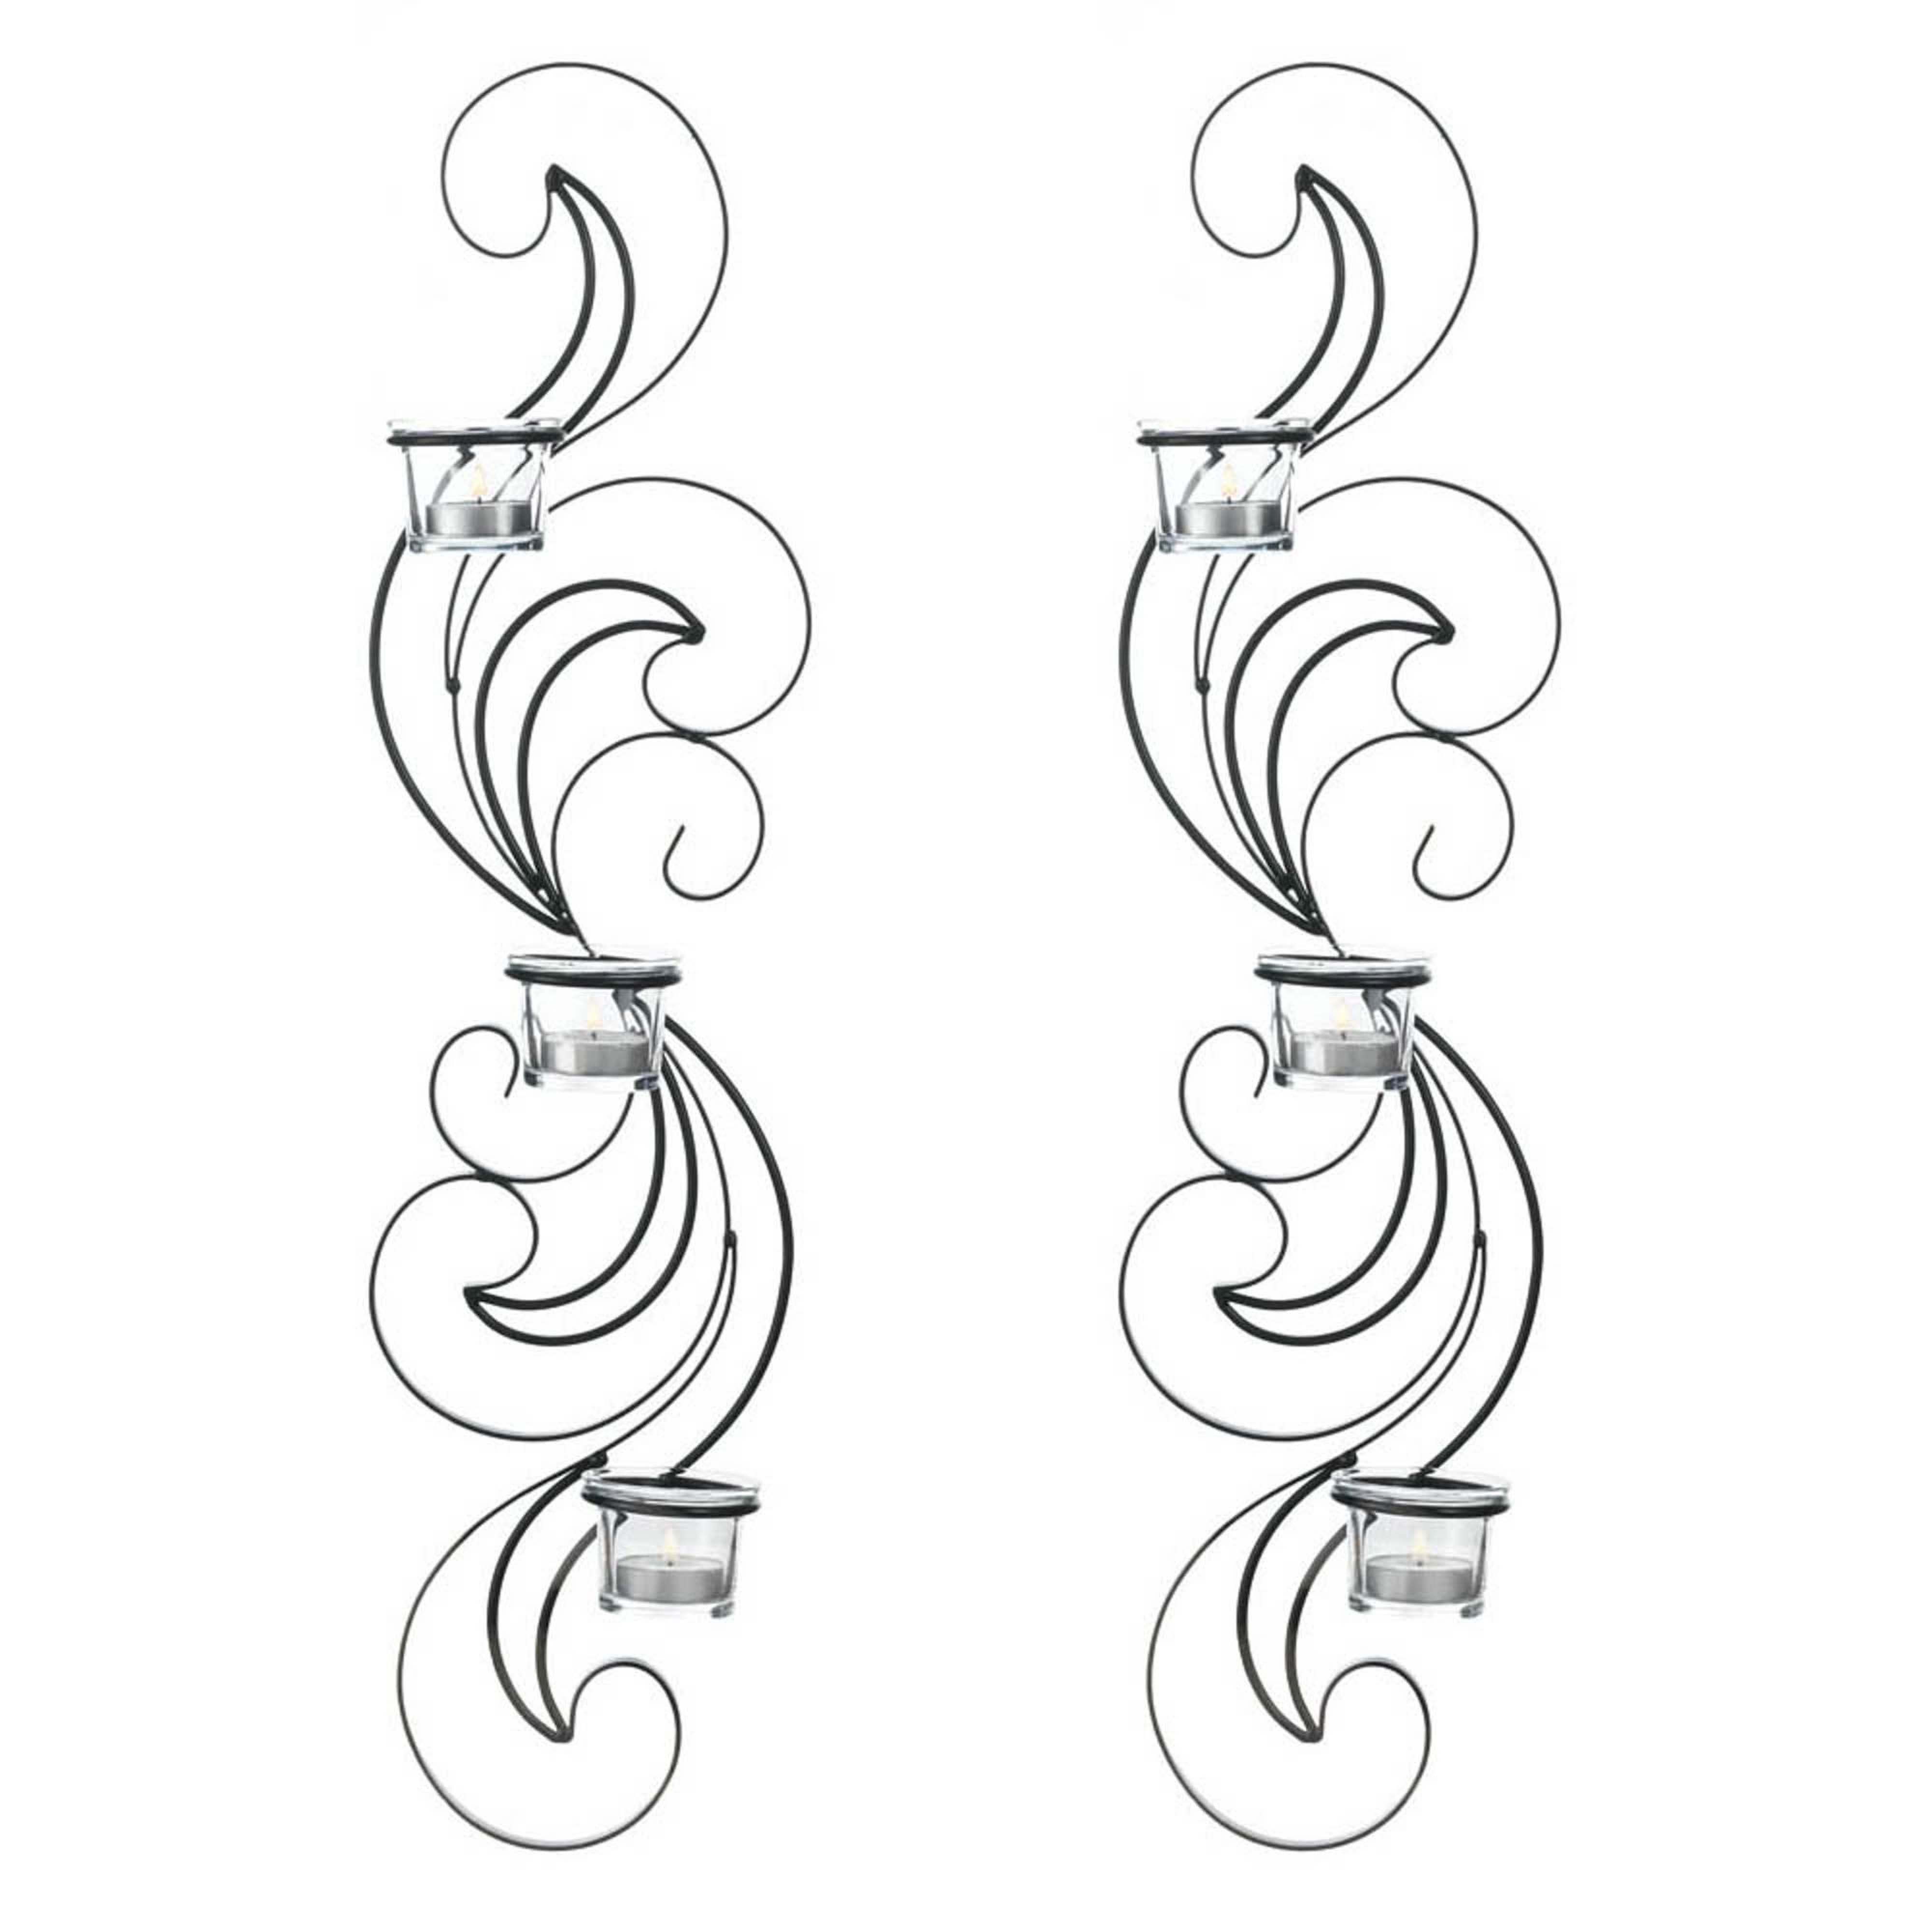 24.5&#x27;&#x27; Wisp Candle Wall Sconce, 2ct.